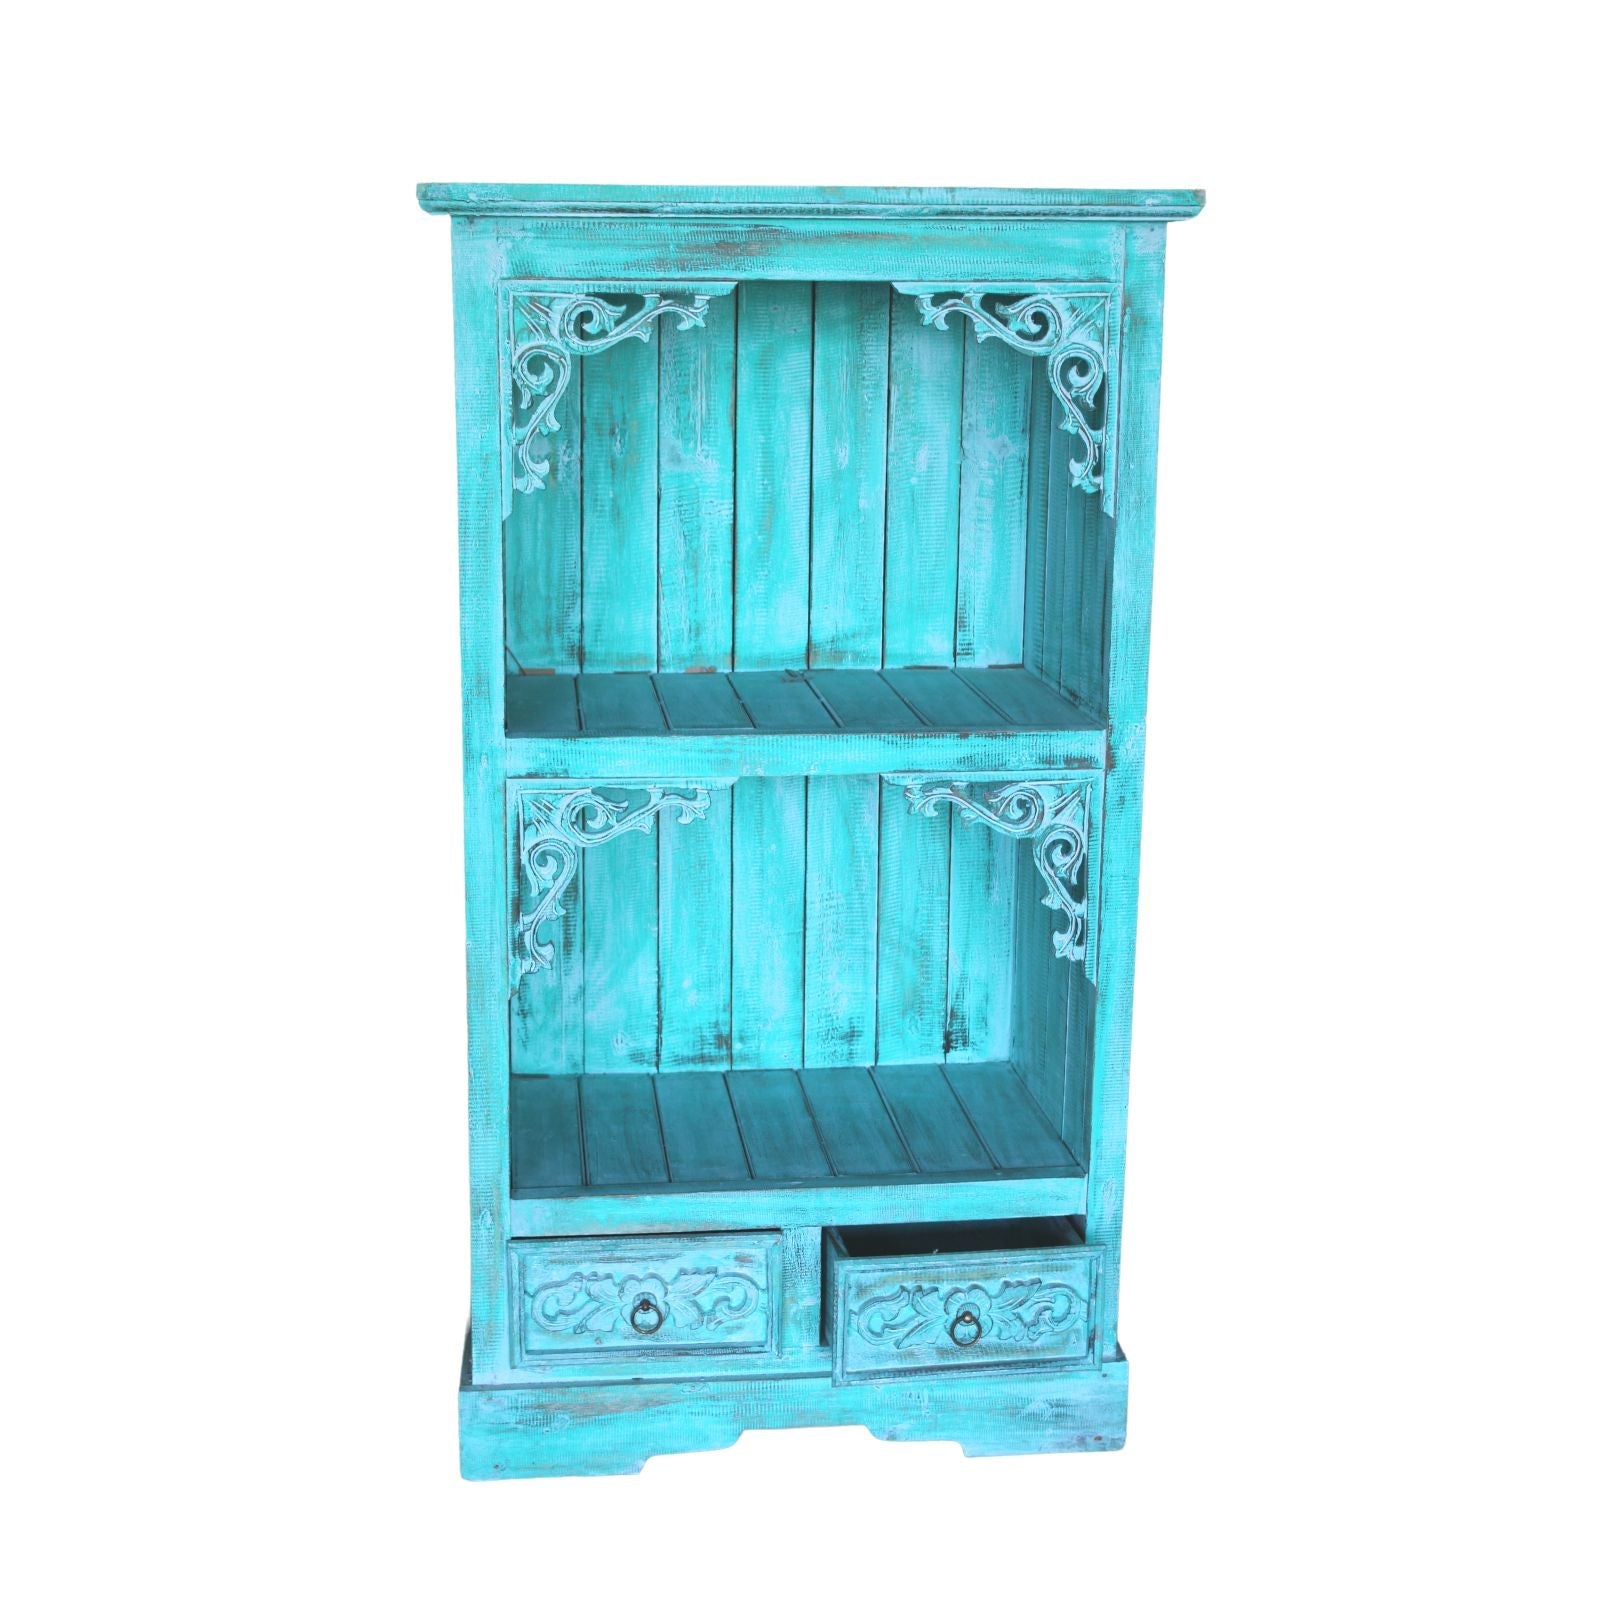 View Albasia Bathroom Cabinet Turquoise wash information